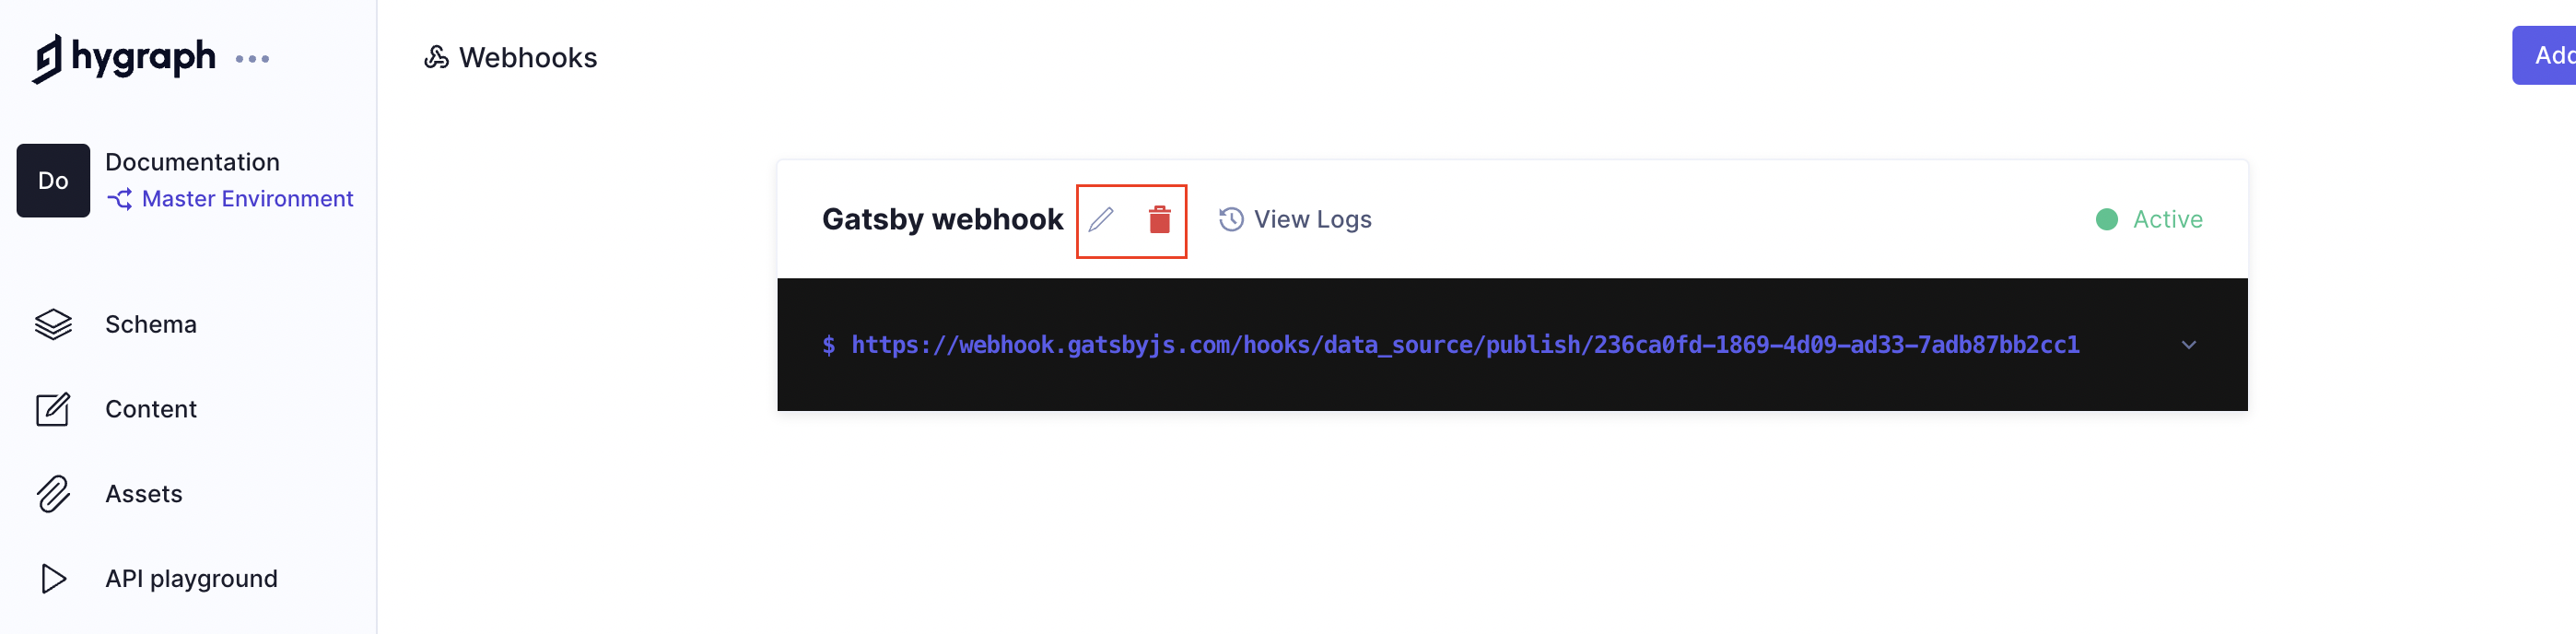 Gatsby webhook example - Edit and delete icons